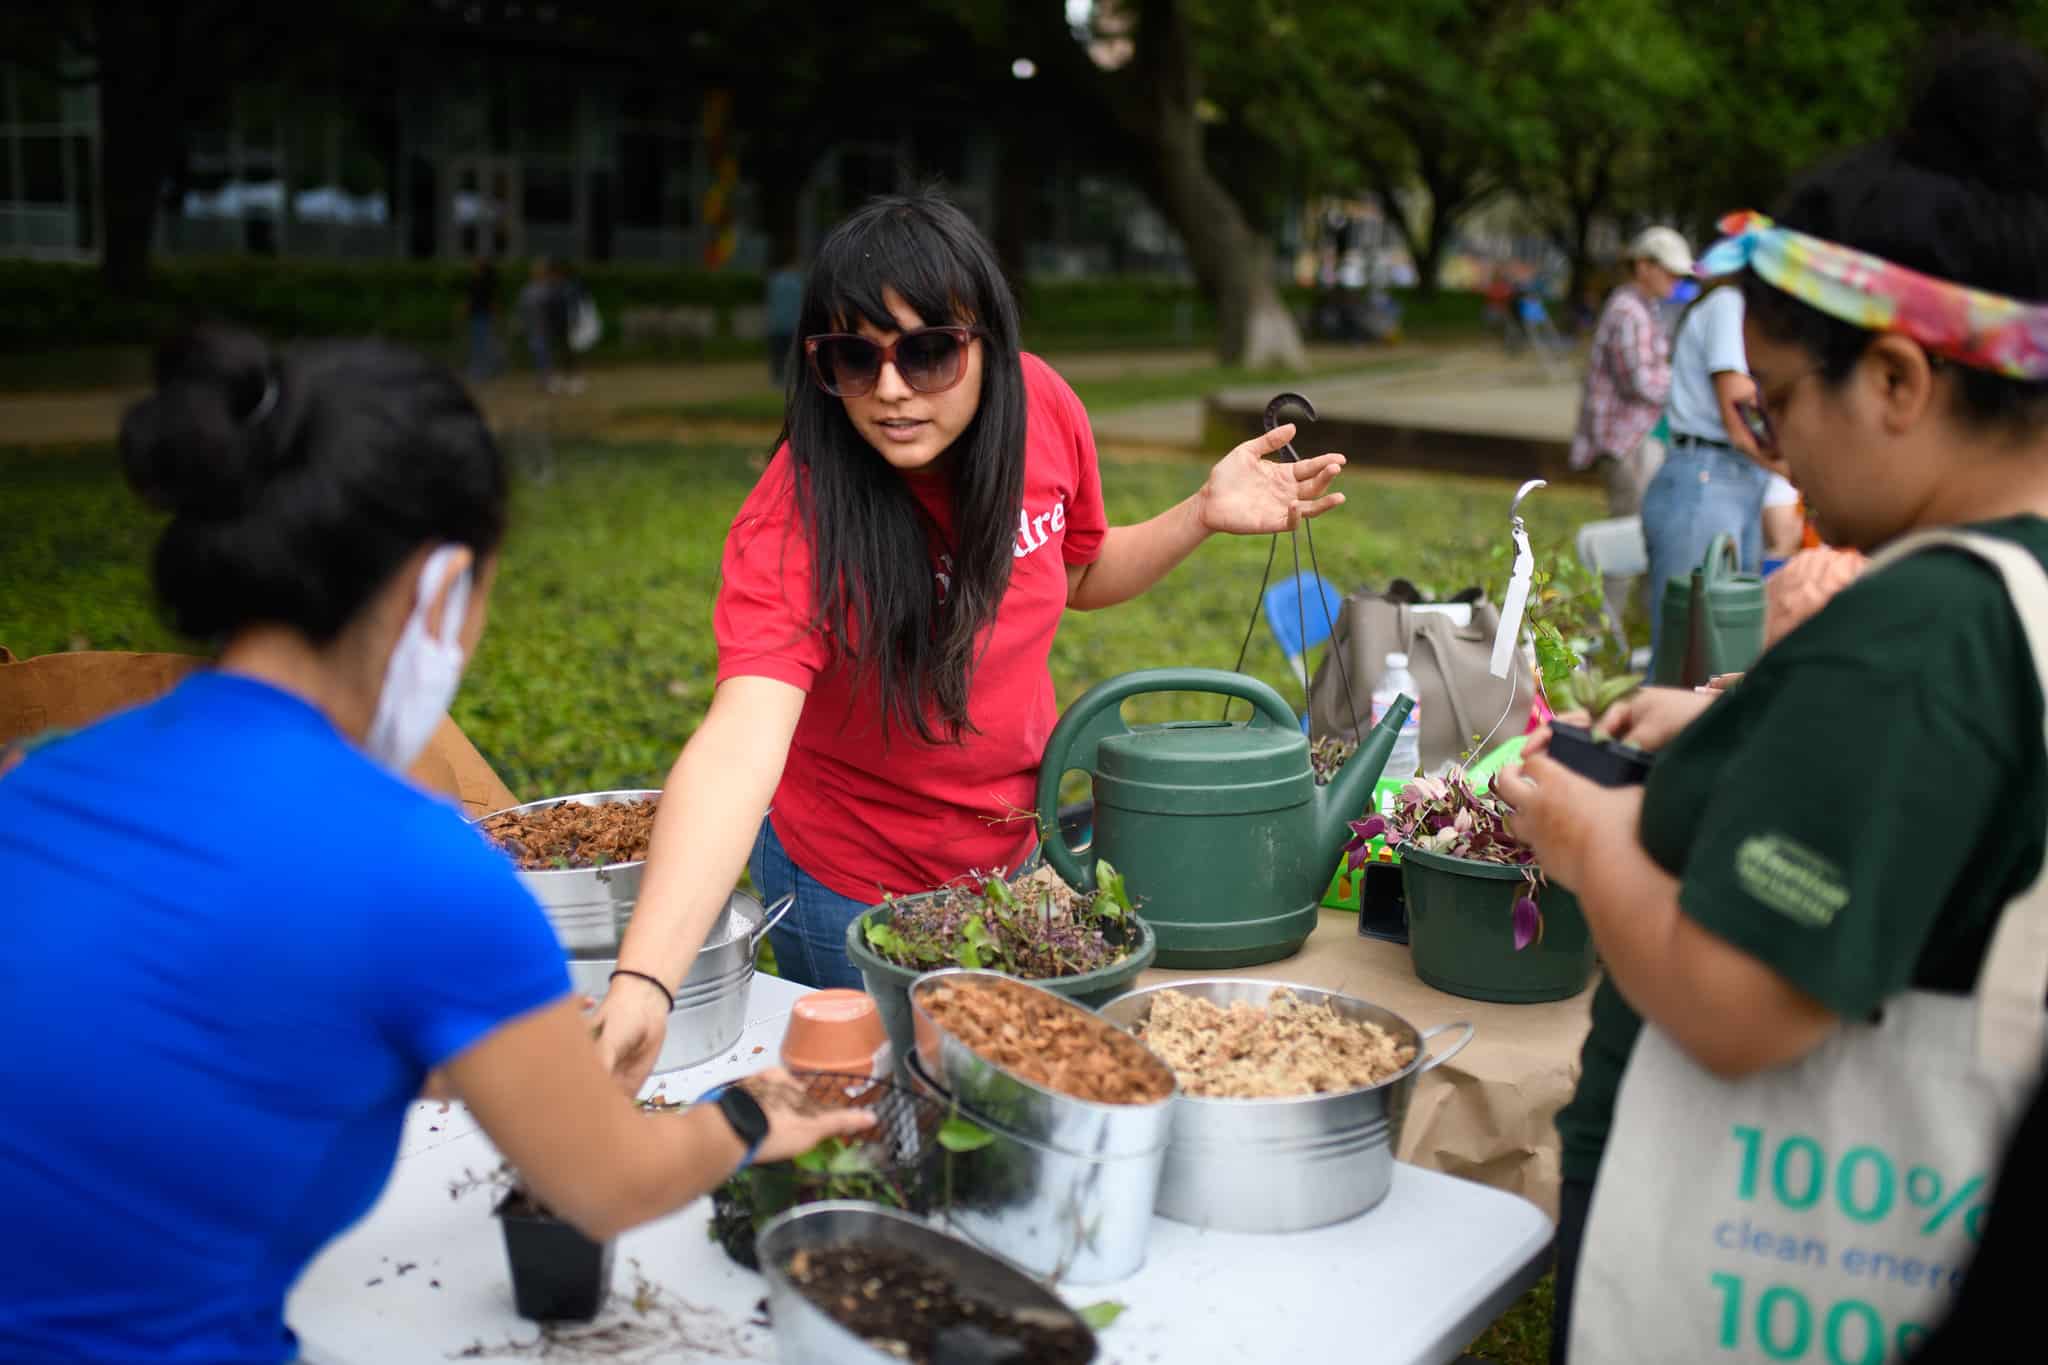 A vendor shows the plants she has for sale at Green Mountain Energy Earth Day at Discovery Green